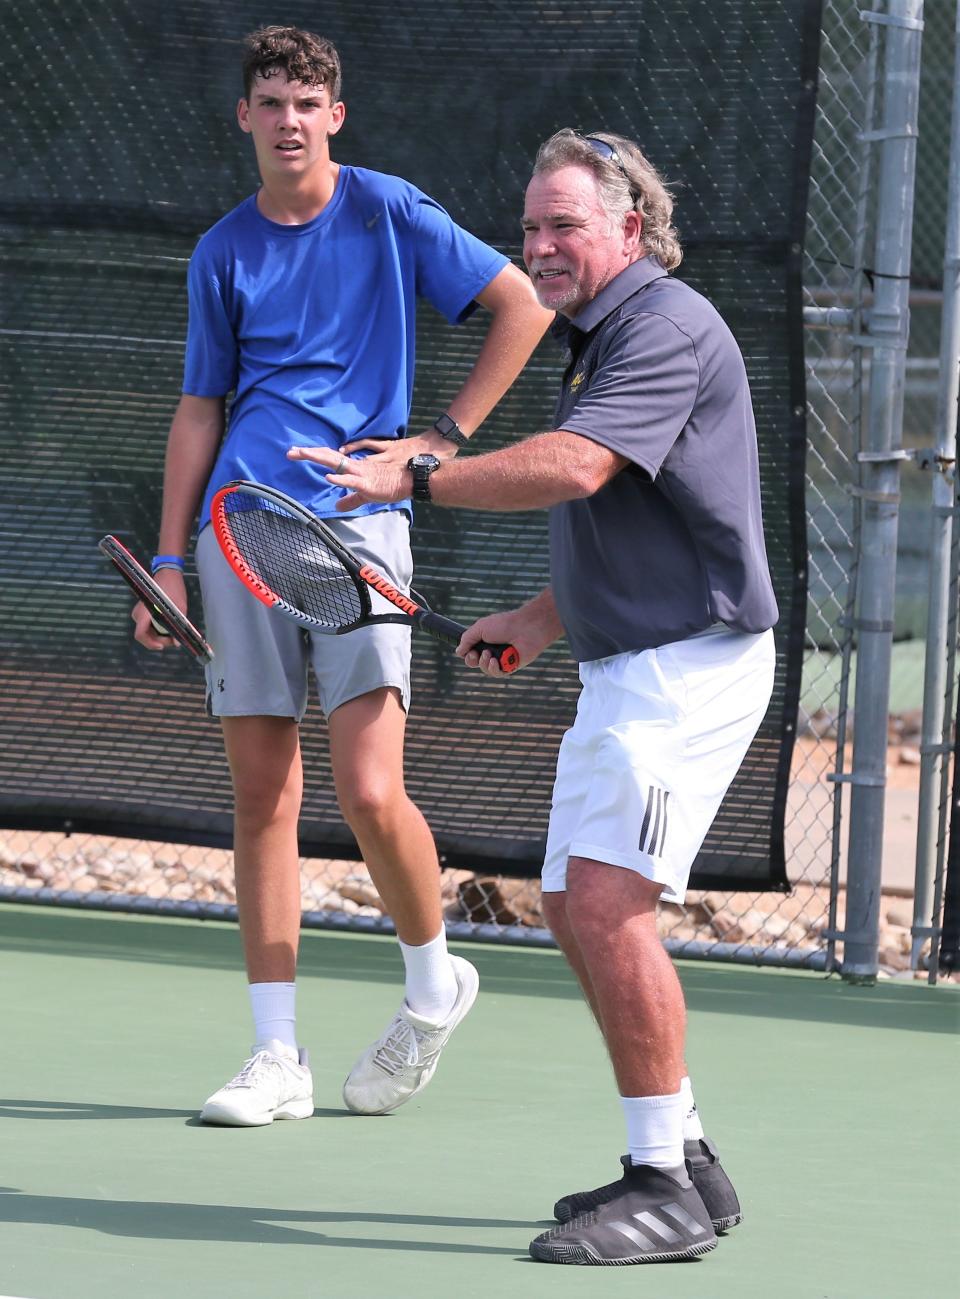 Bentwood Country Club's Kevin Collins gives a tennis lesson to Wall High School's Payne Smith in a file photo.